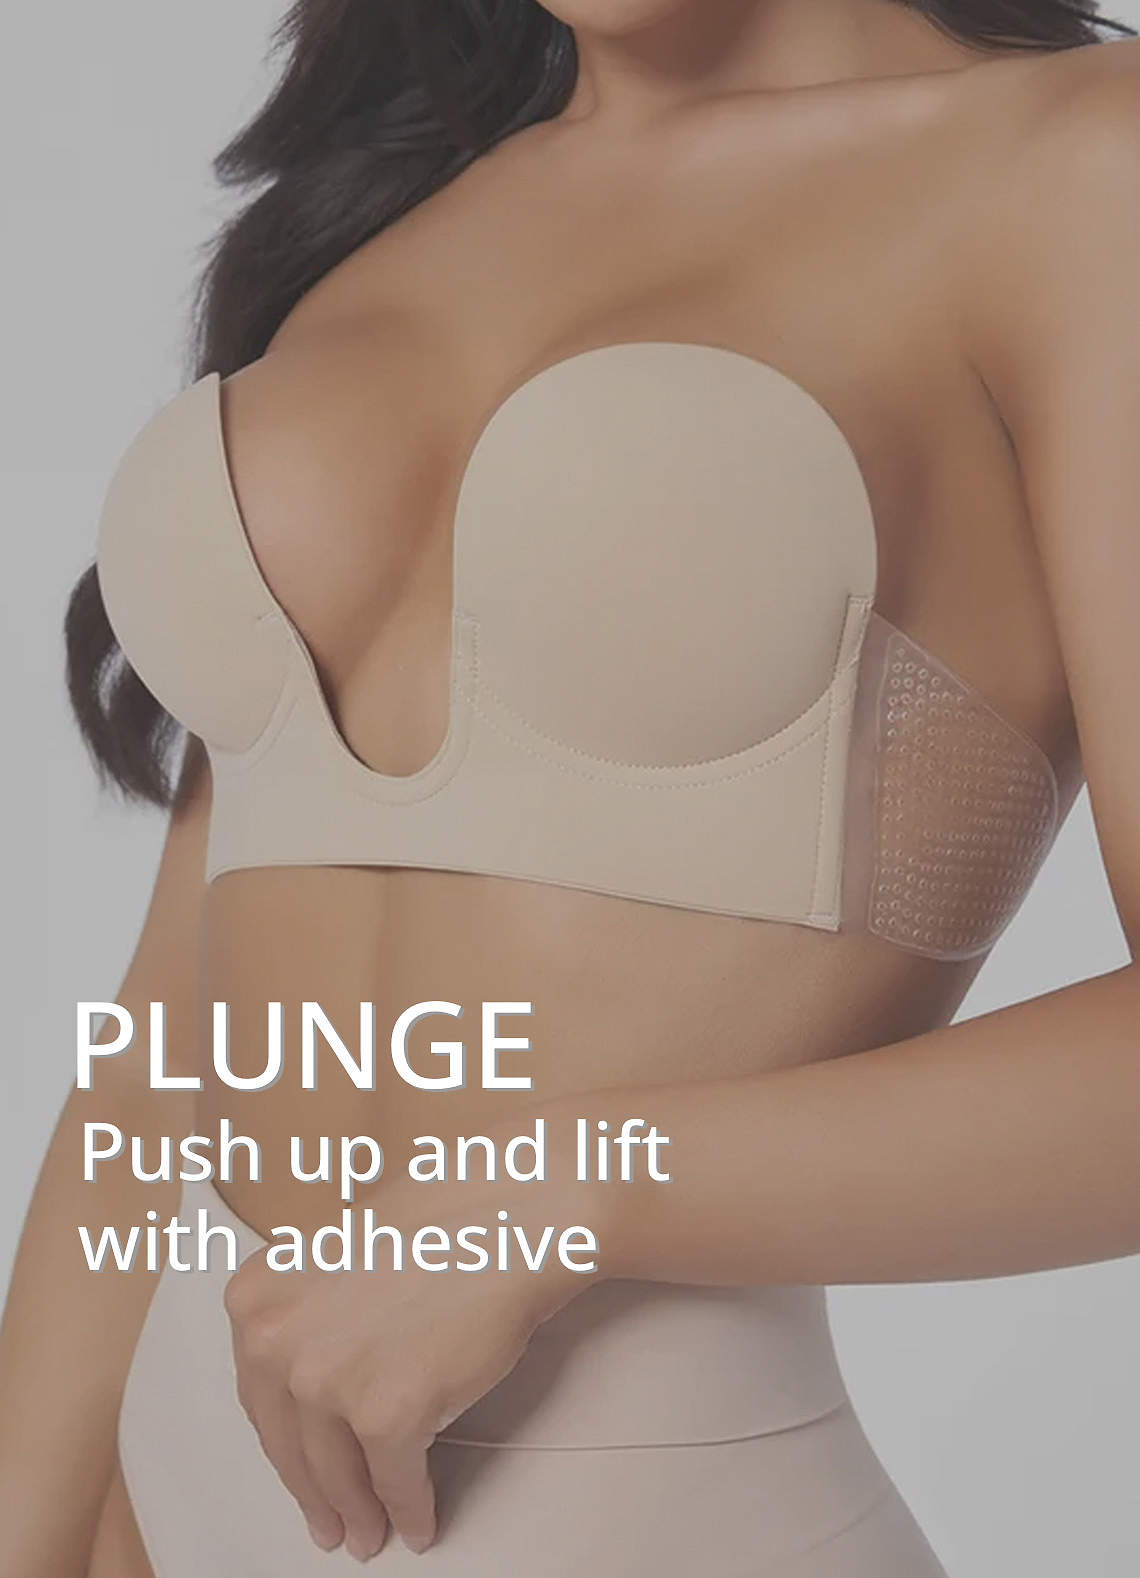 Backless, strapless Deep Plunge Bra adds lift and more cleavage